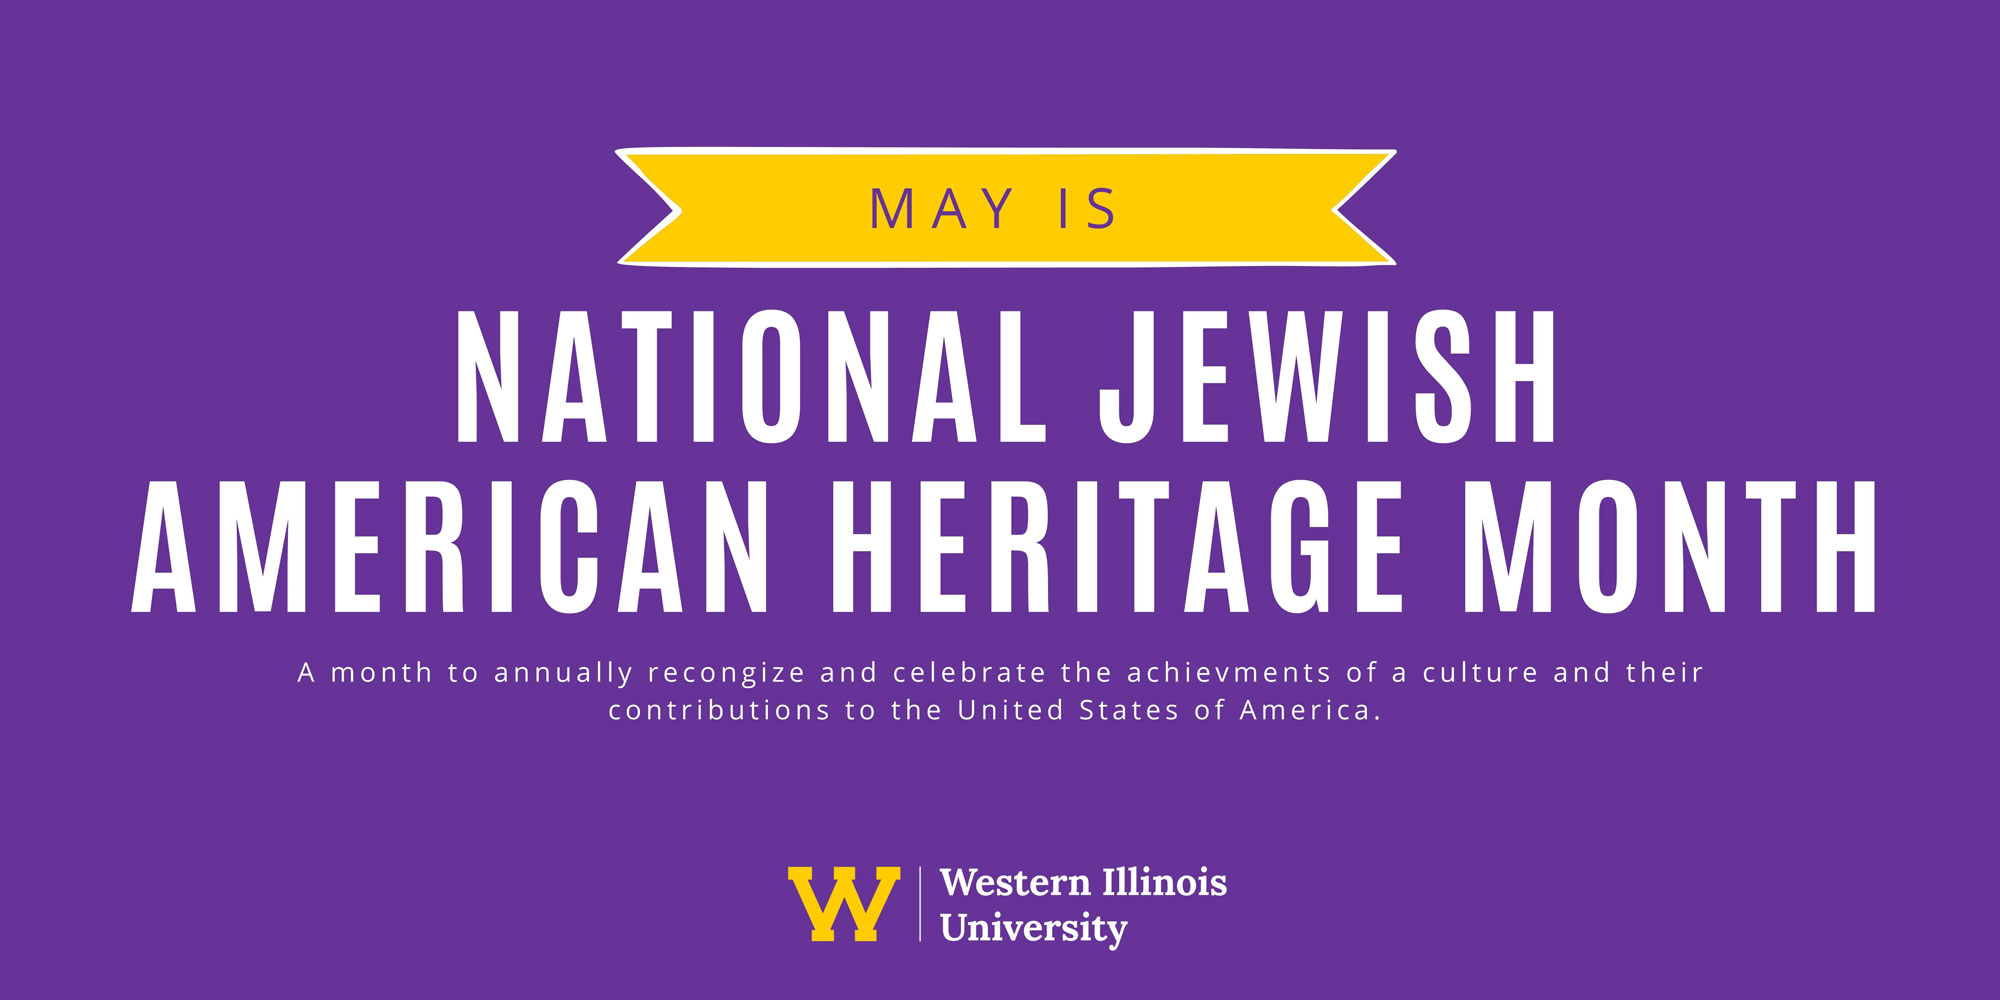 Jewish American Heritage Month - Month of May